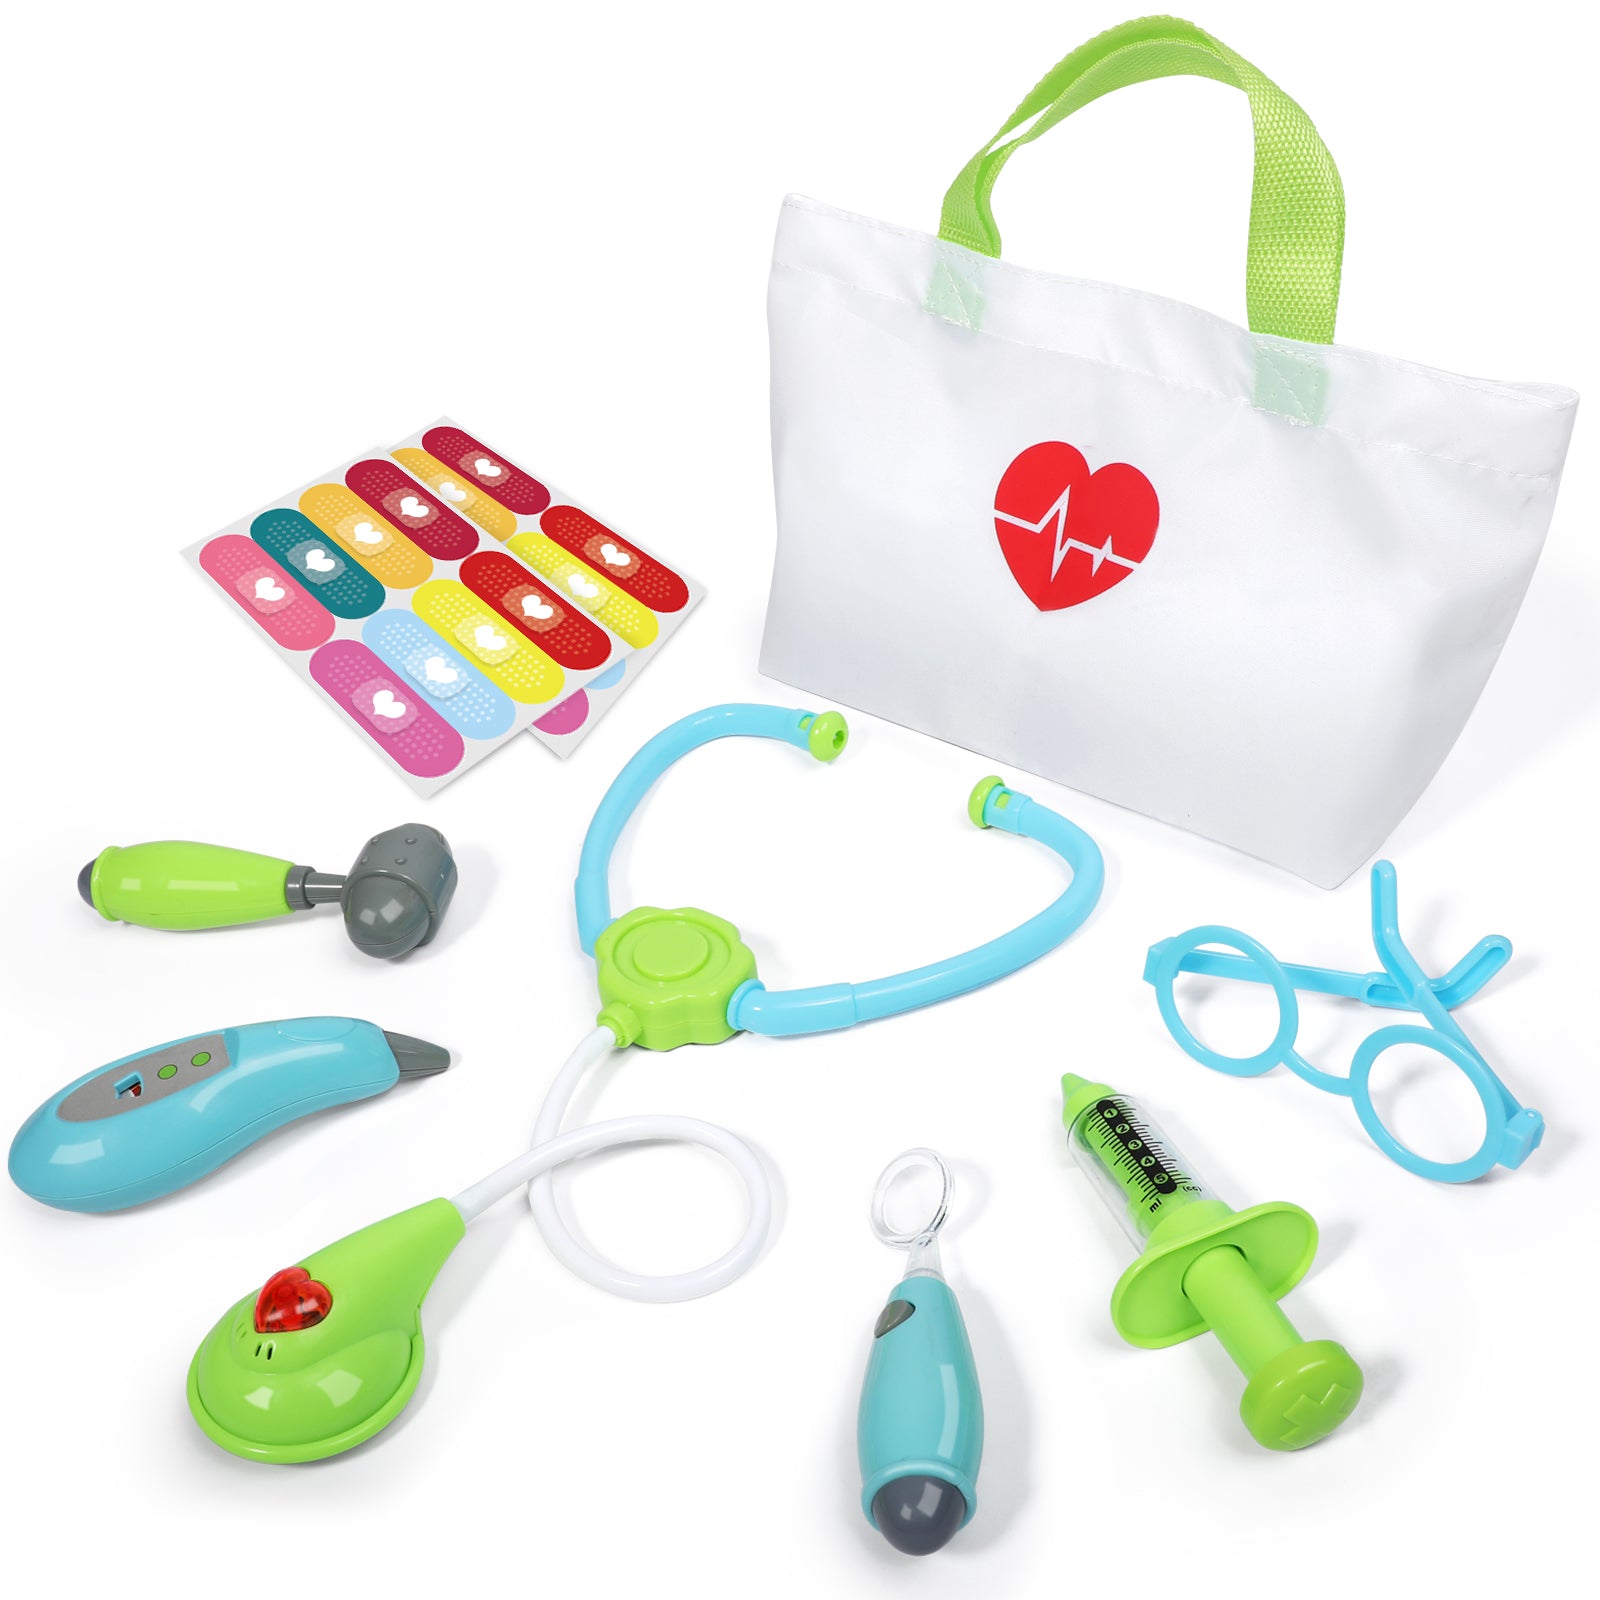 Kids Doctor Kit, 8 Pieces Kids Doctor Playset with Medical Storage Bag and Electronic Stethoscope